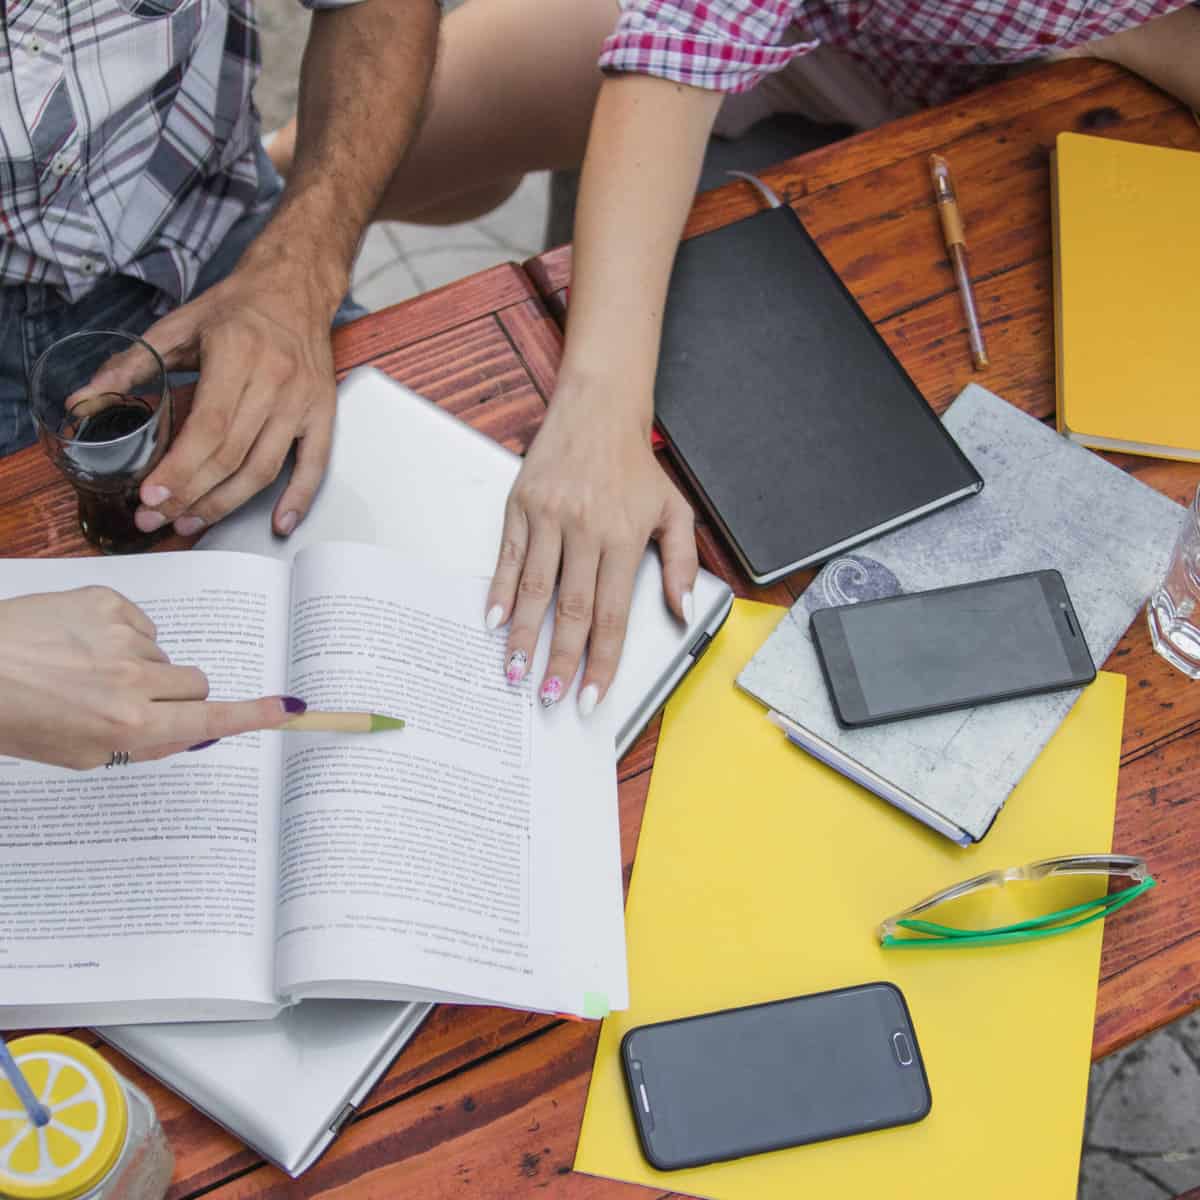 Students sit at a table with an open text book, notepads, cells phones.